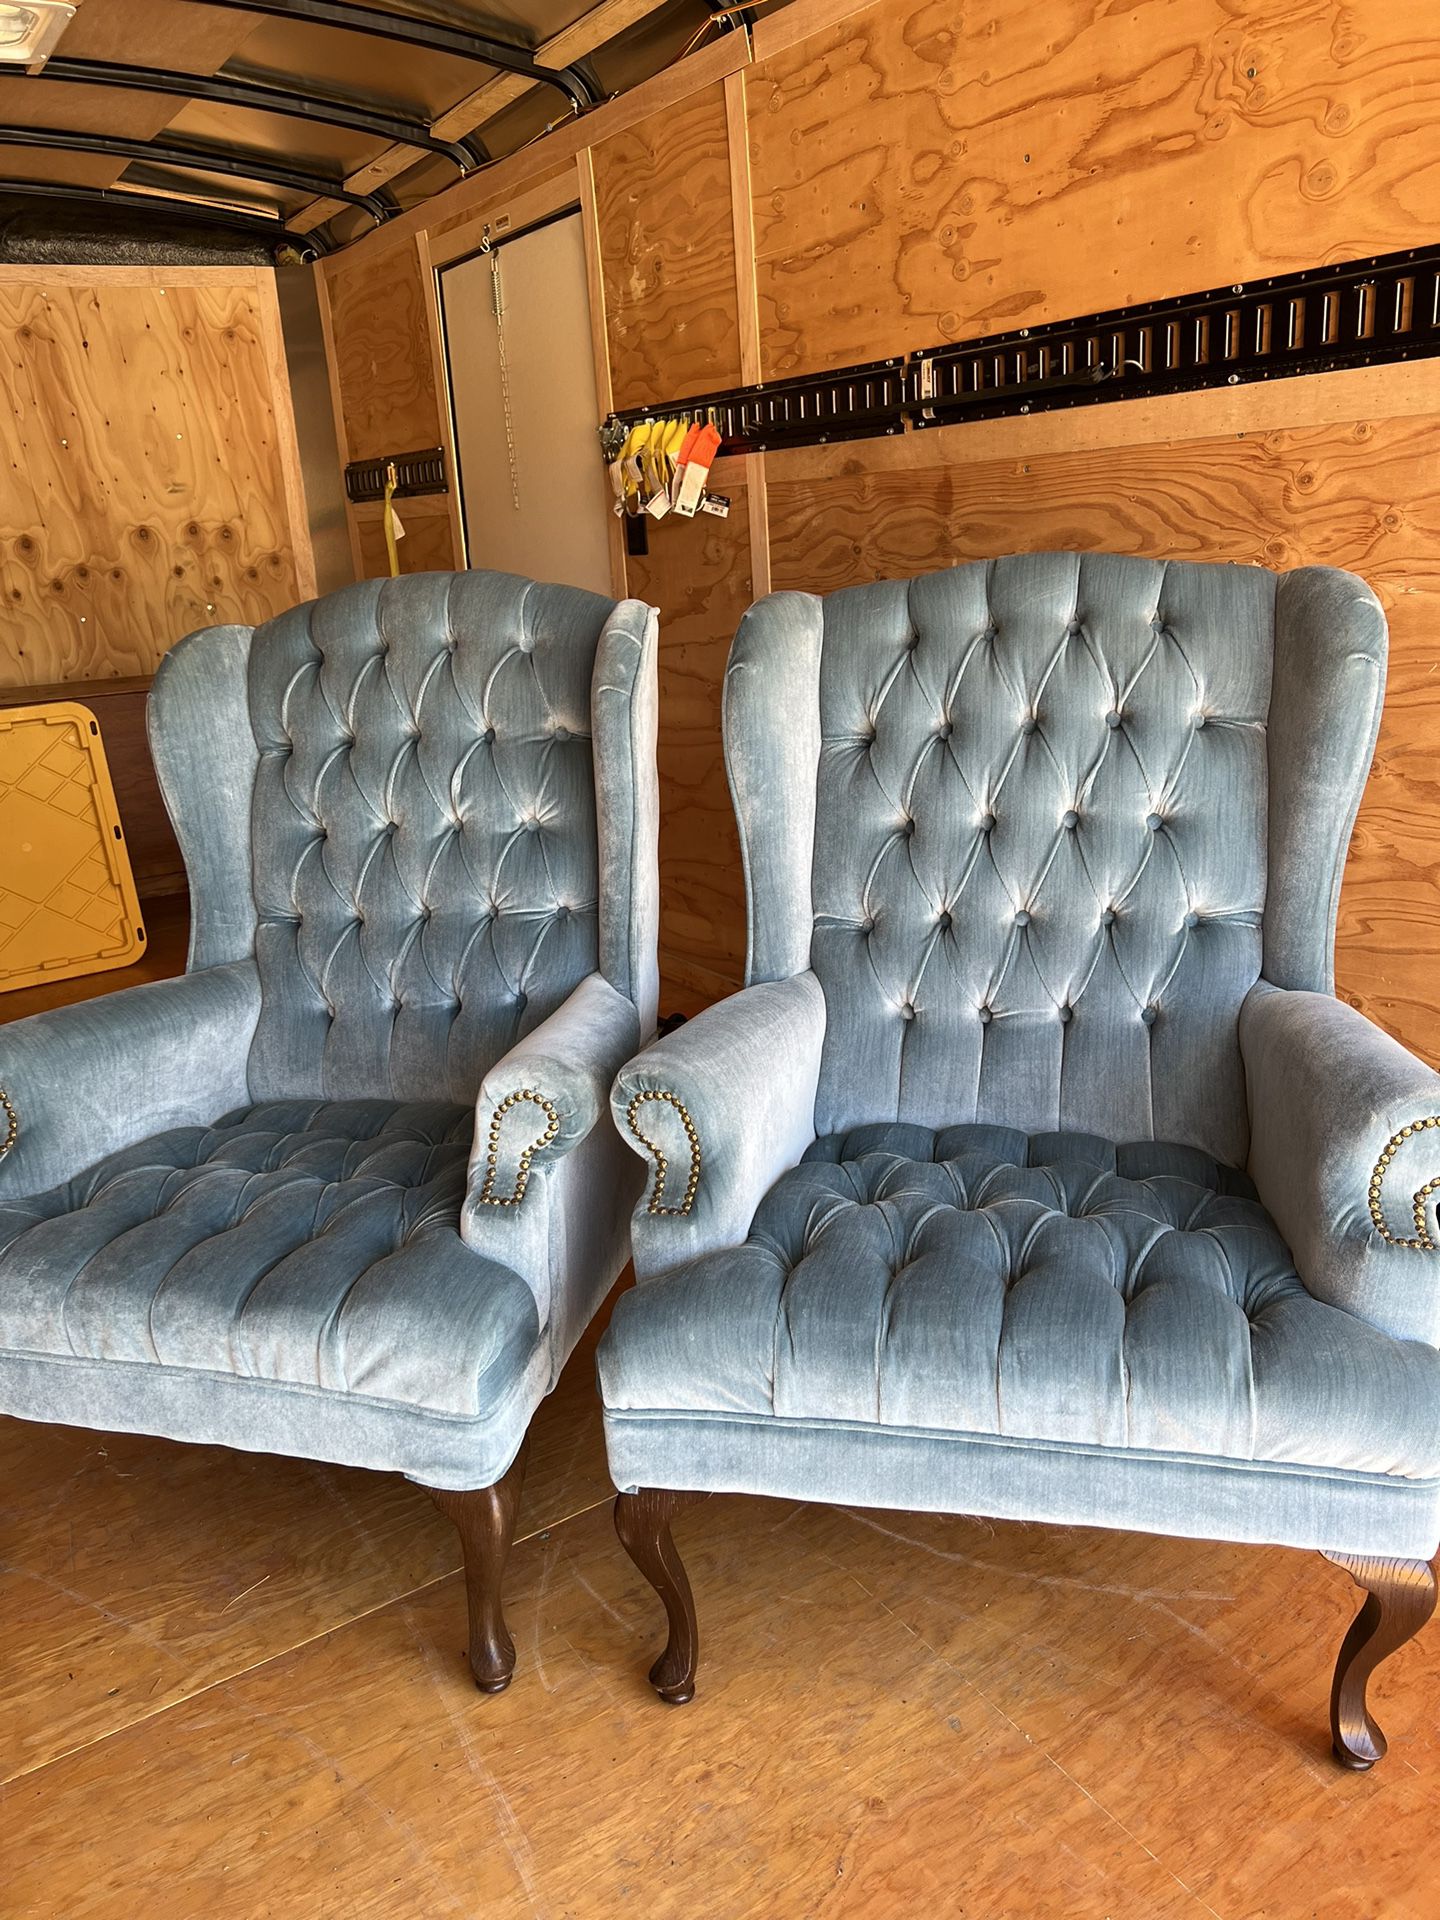 2 Blue wingback chairs 